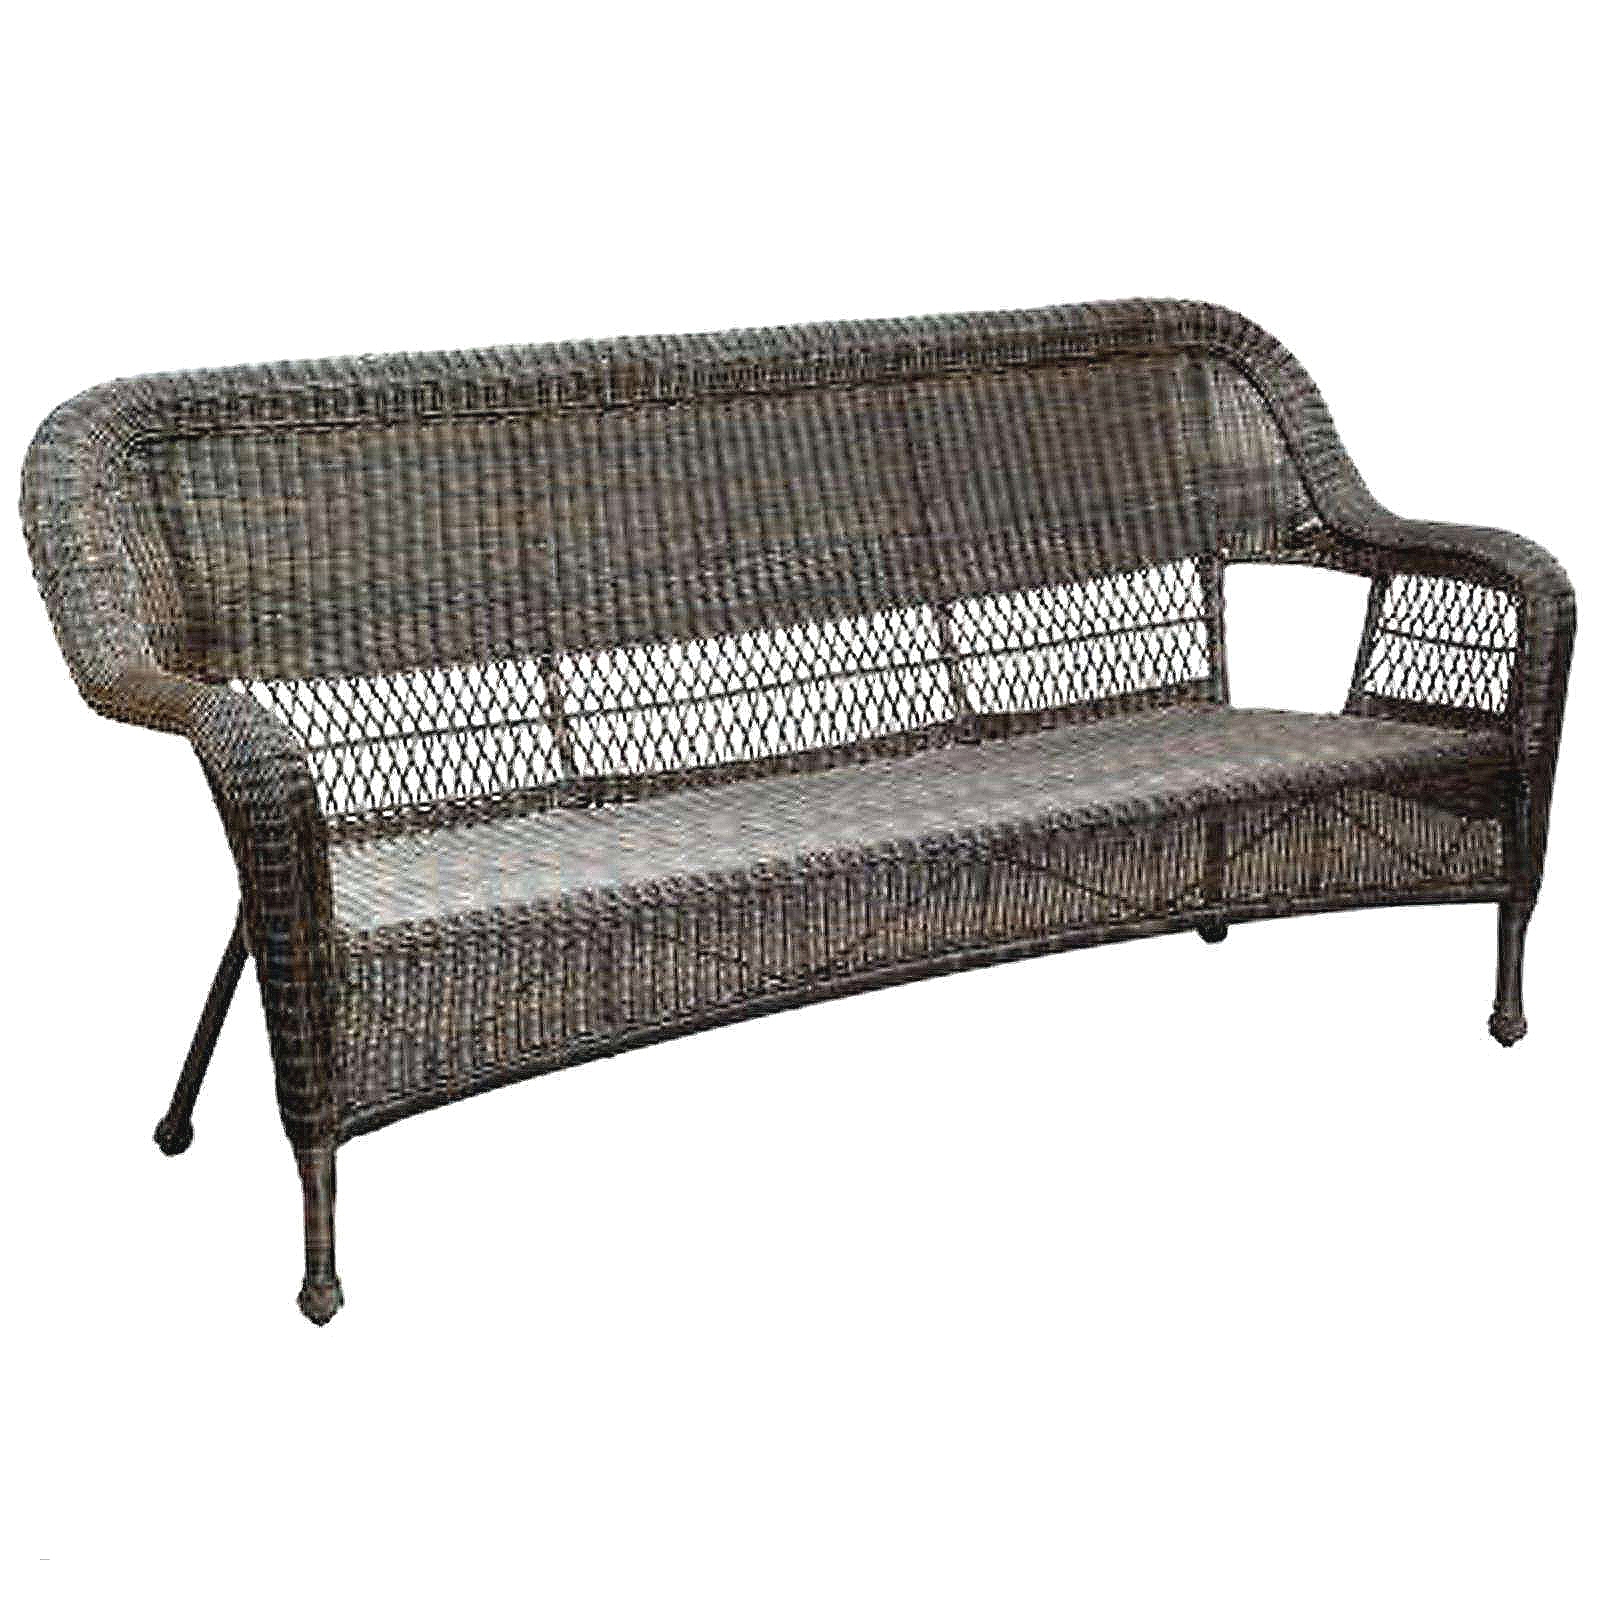 wicker outdoor sofa 0d patio chairs sale replacement cushions design outdoor lounge chair cushions